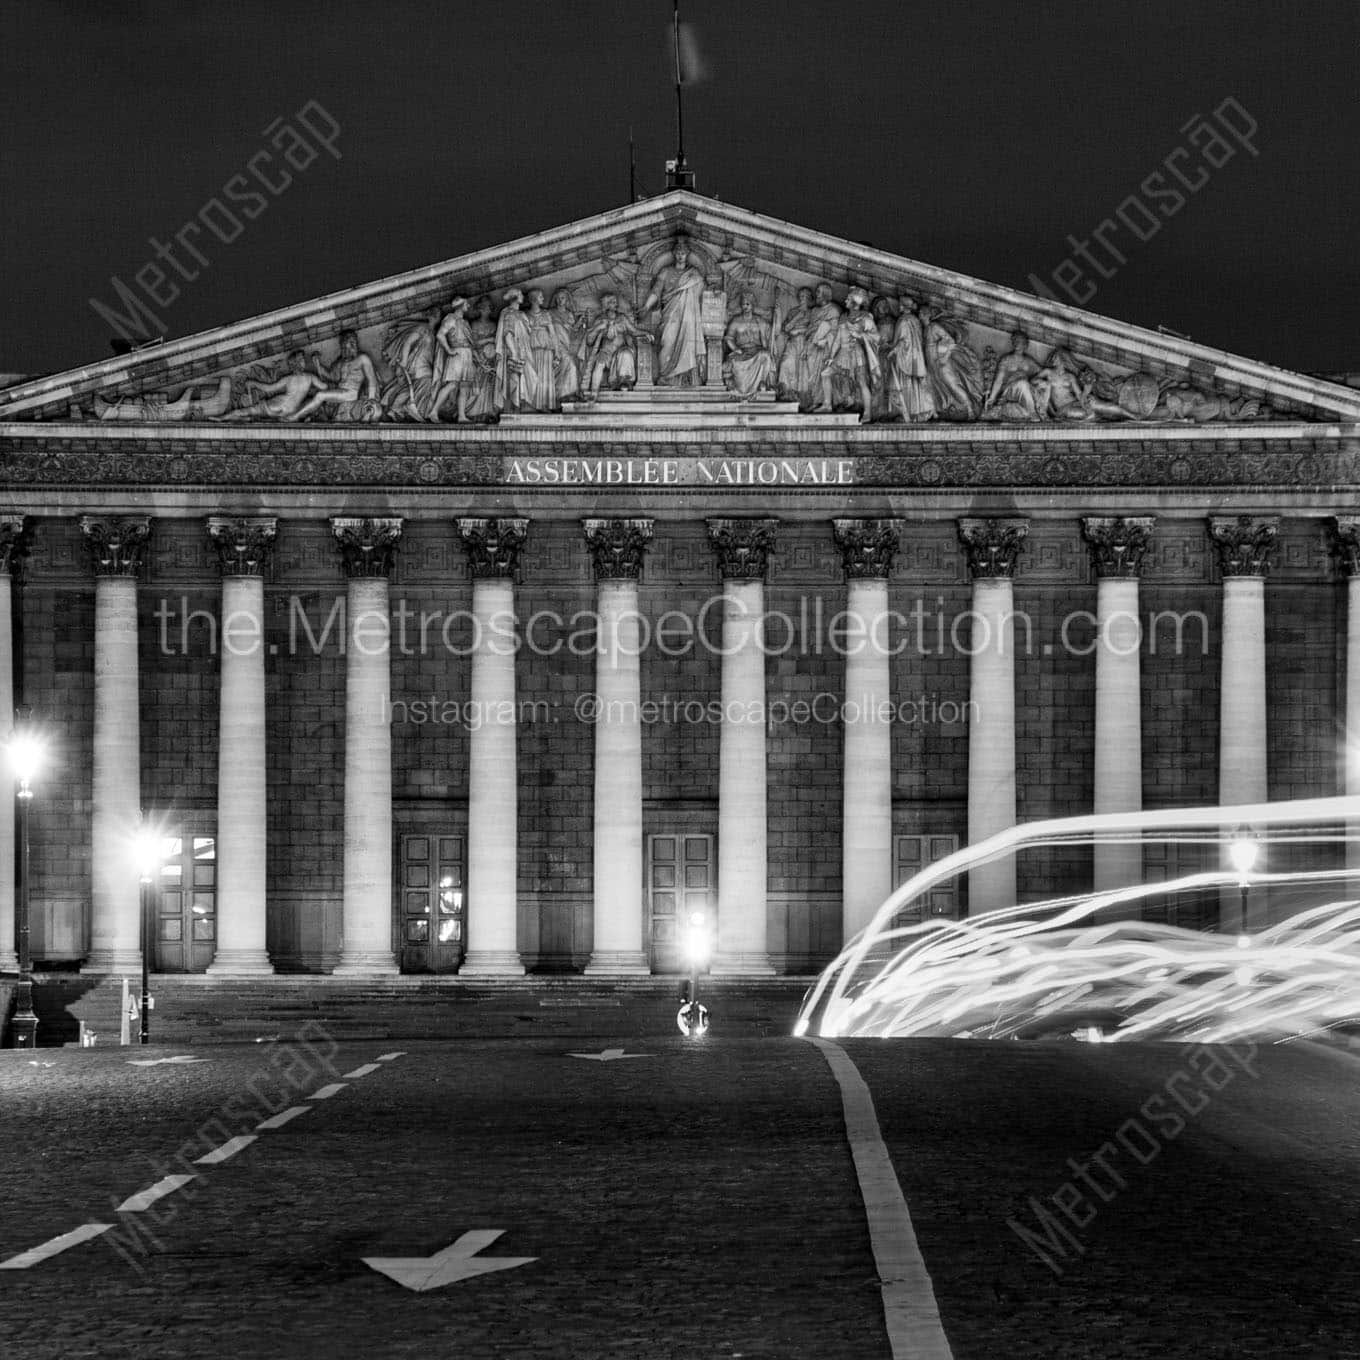 assemblee nationale building at night Black & White Wall Art